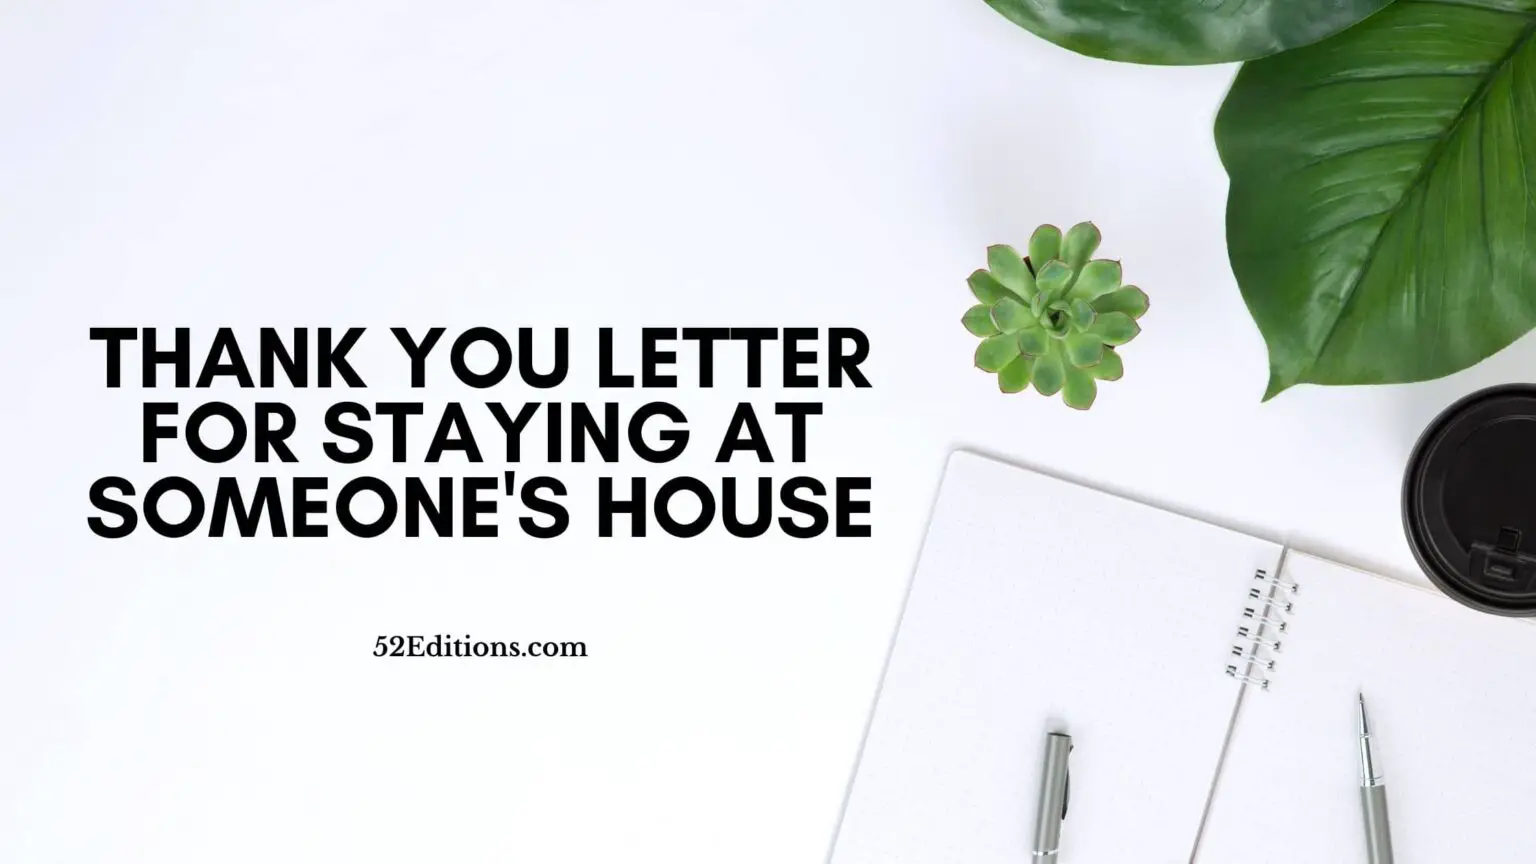 thank-you-letter-for-staying-at-someone-s-house-get-free-letter